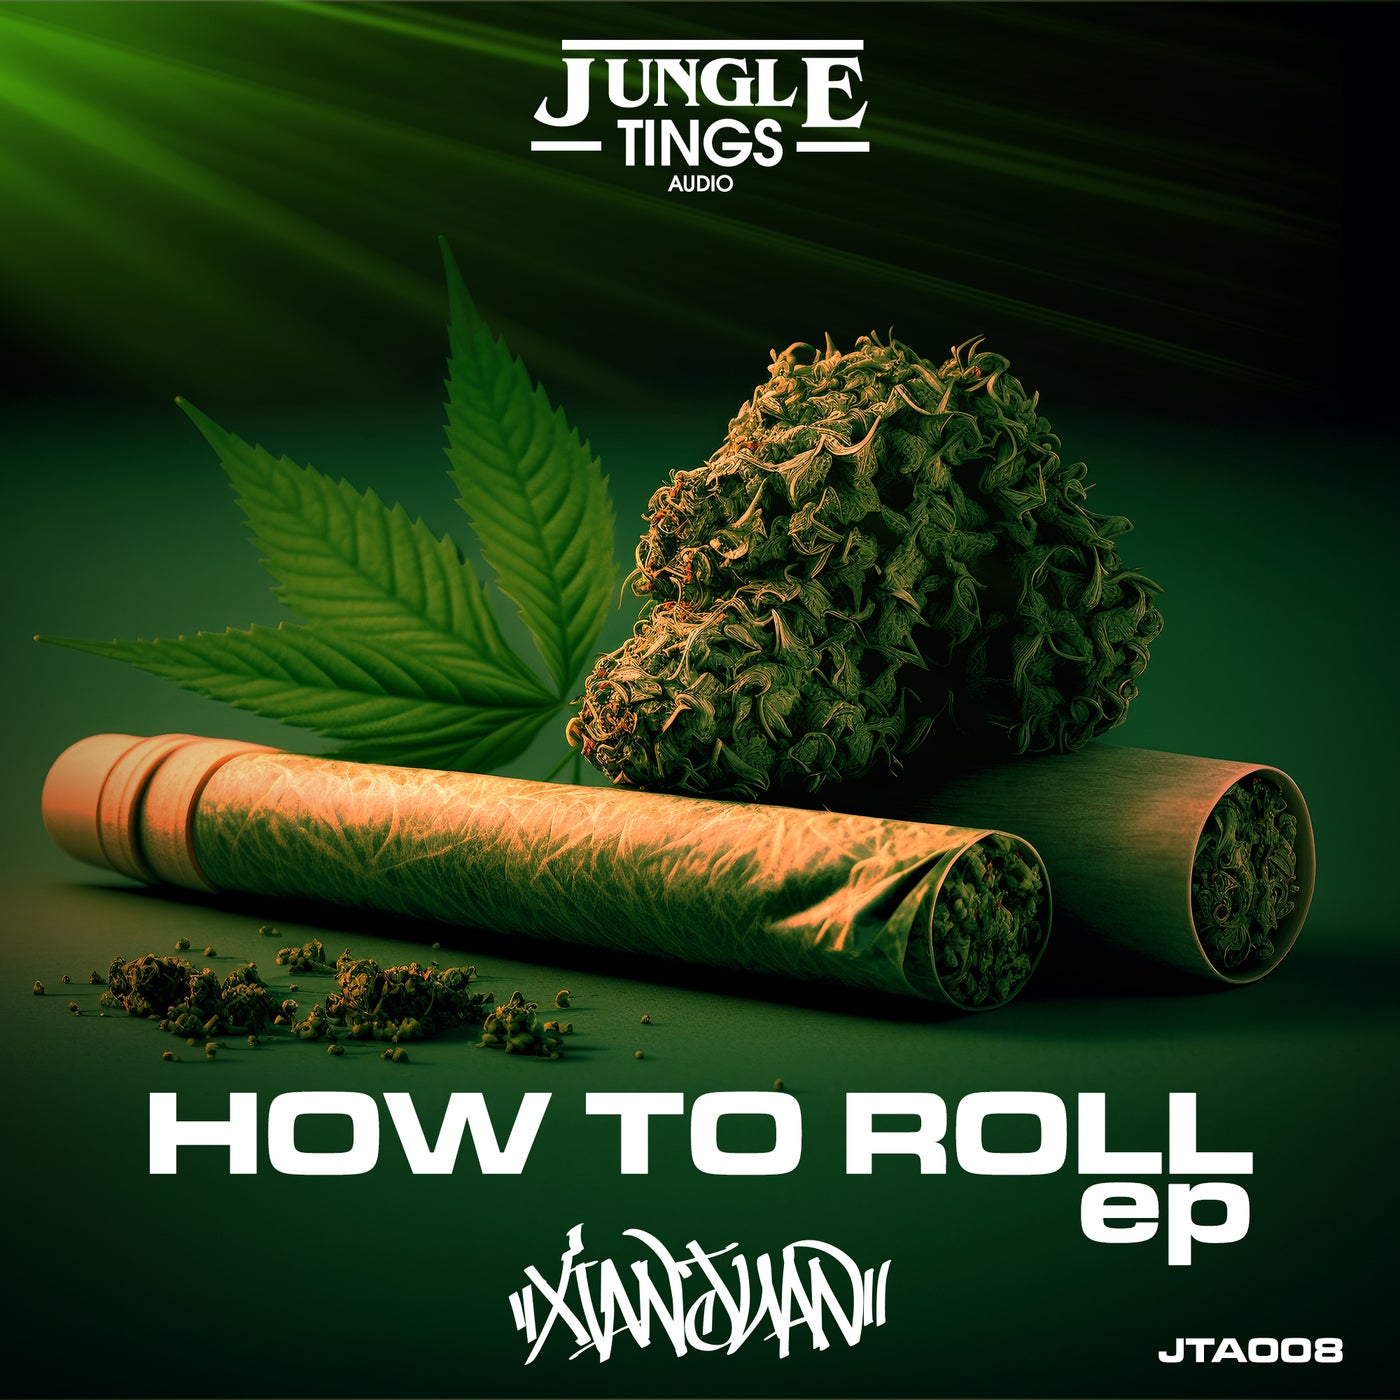 How To Roll